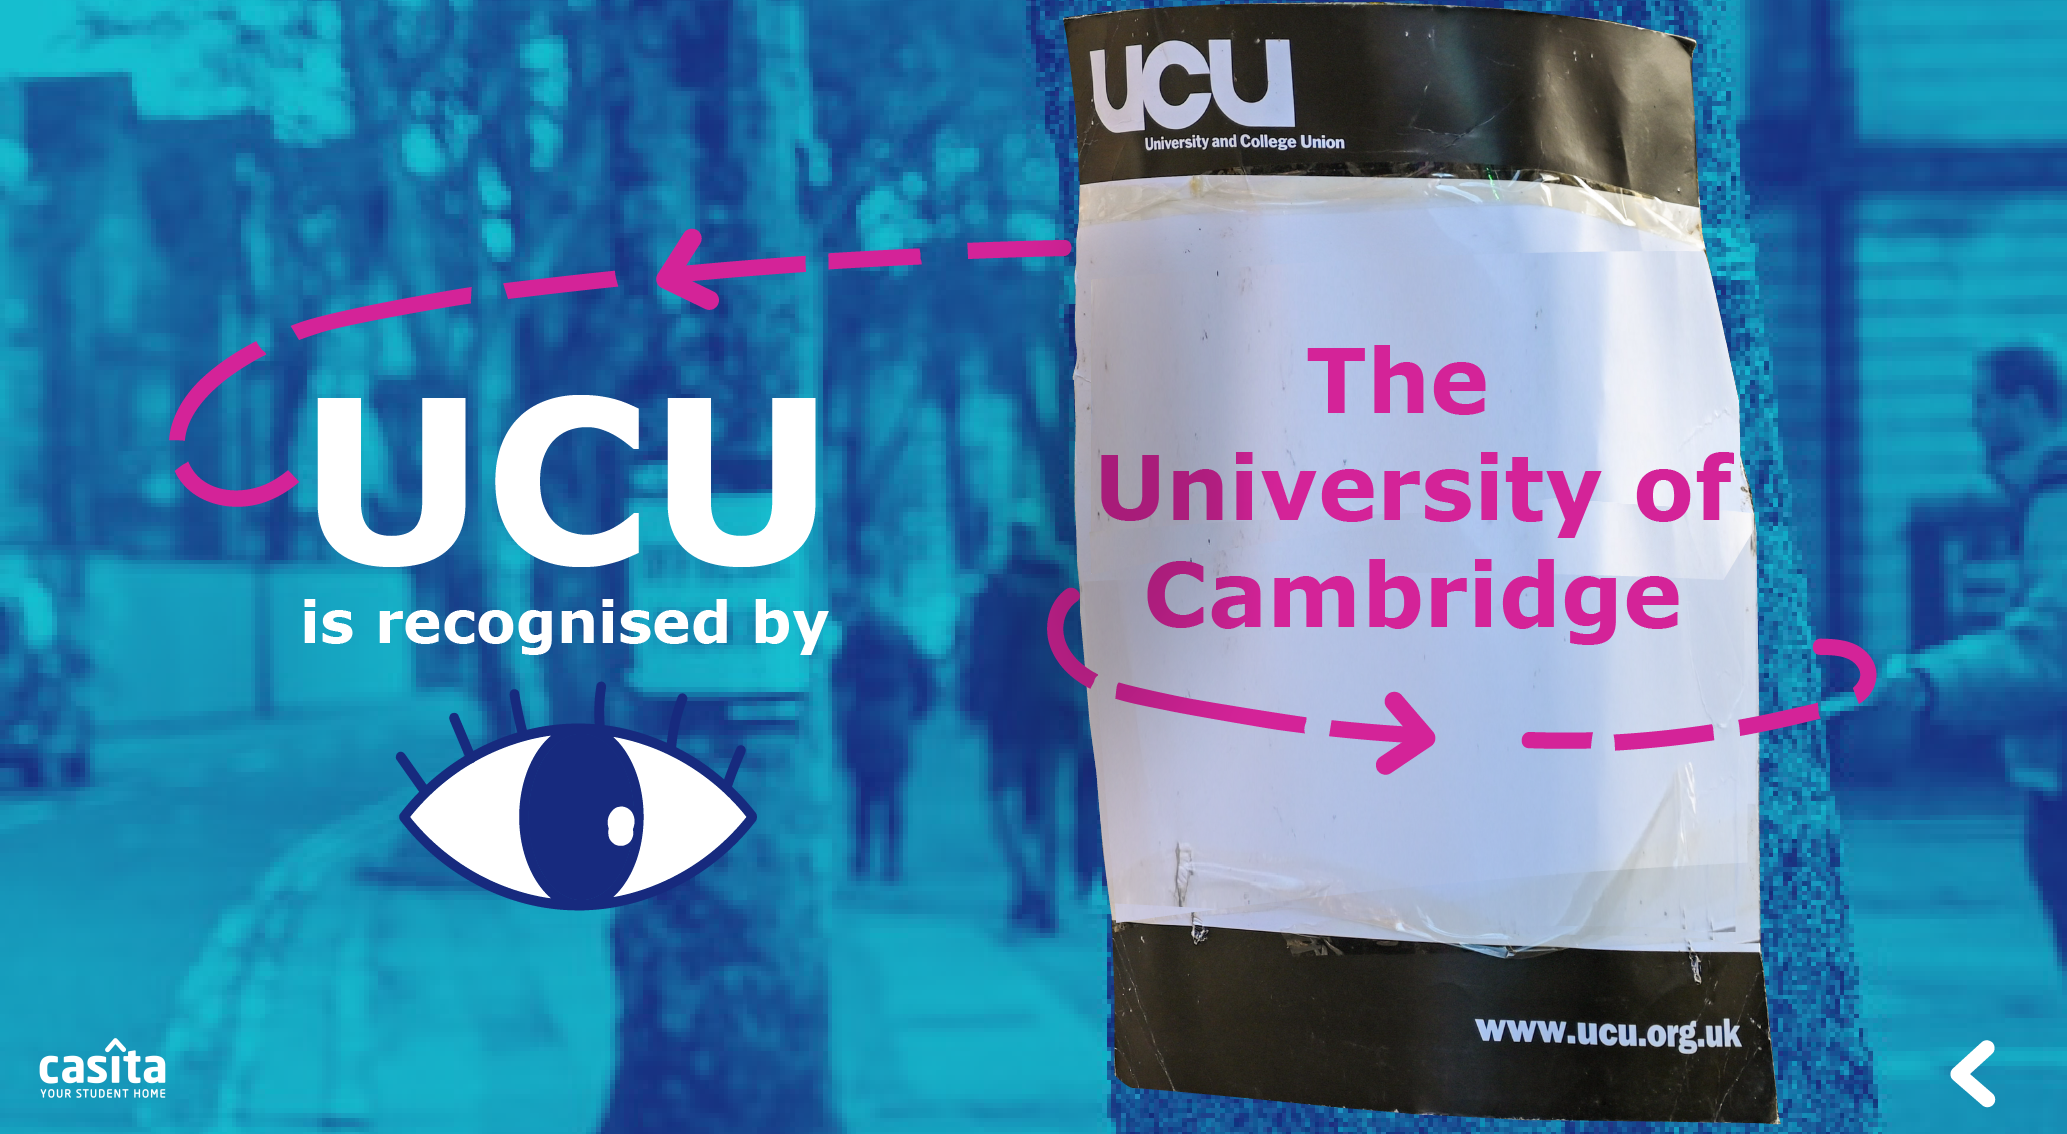 UCU earns the recognition of Cambridge University.